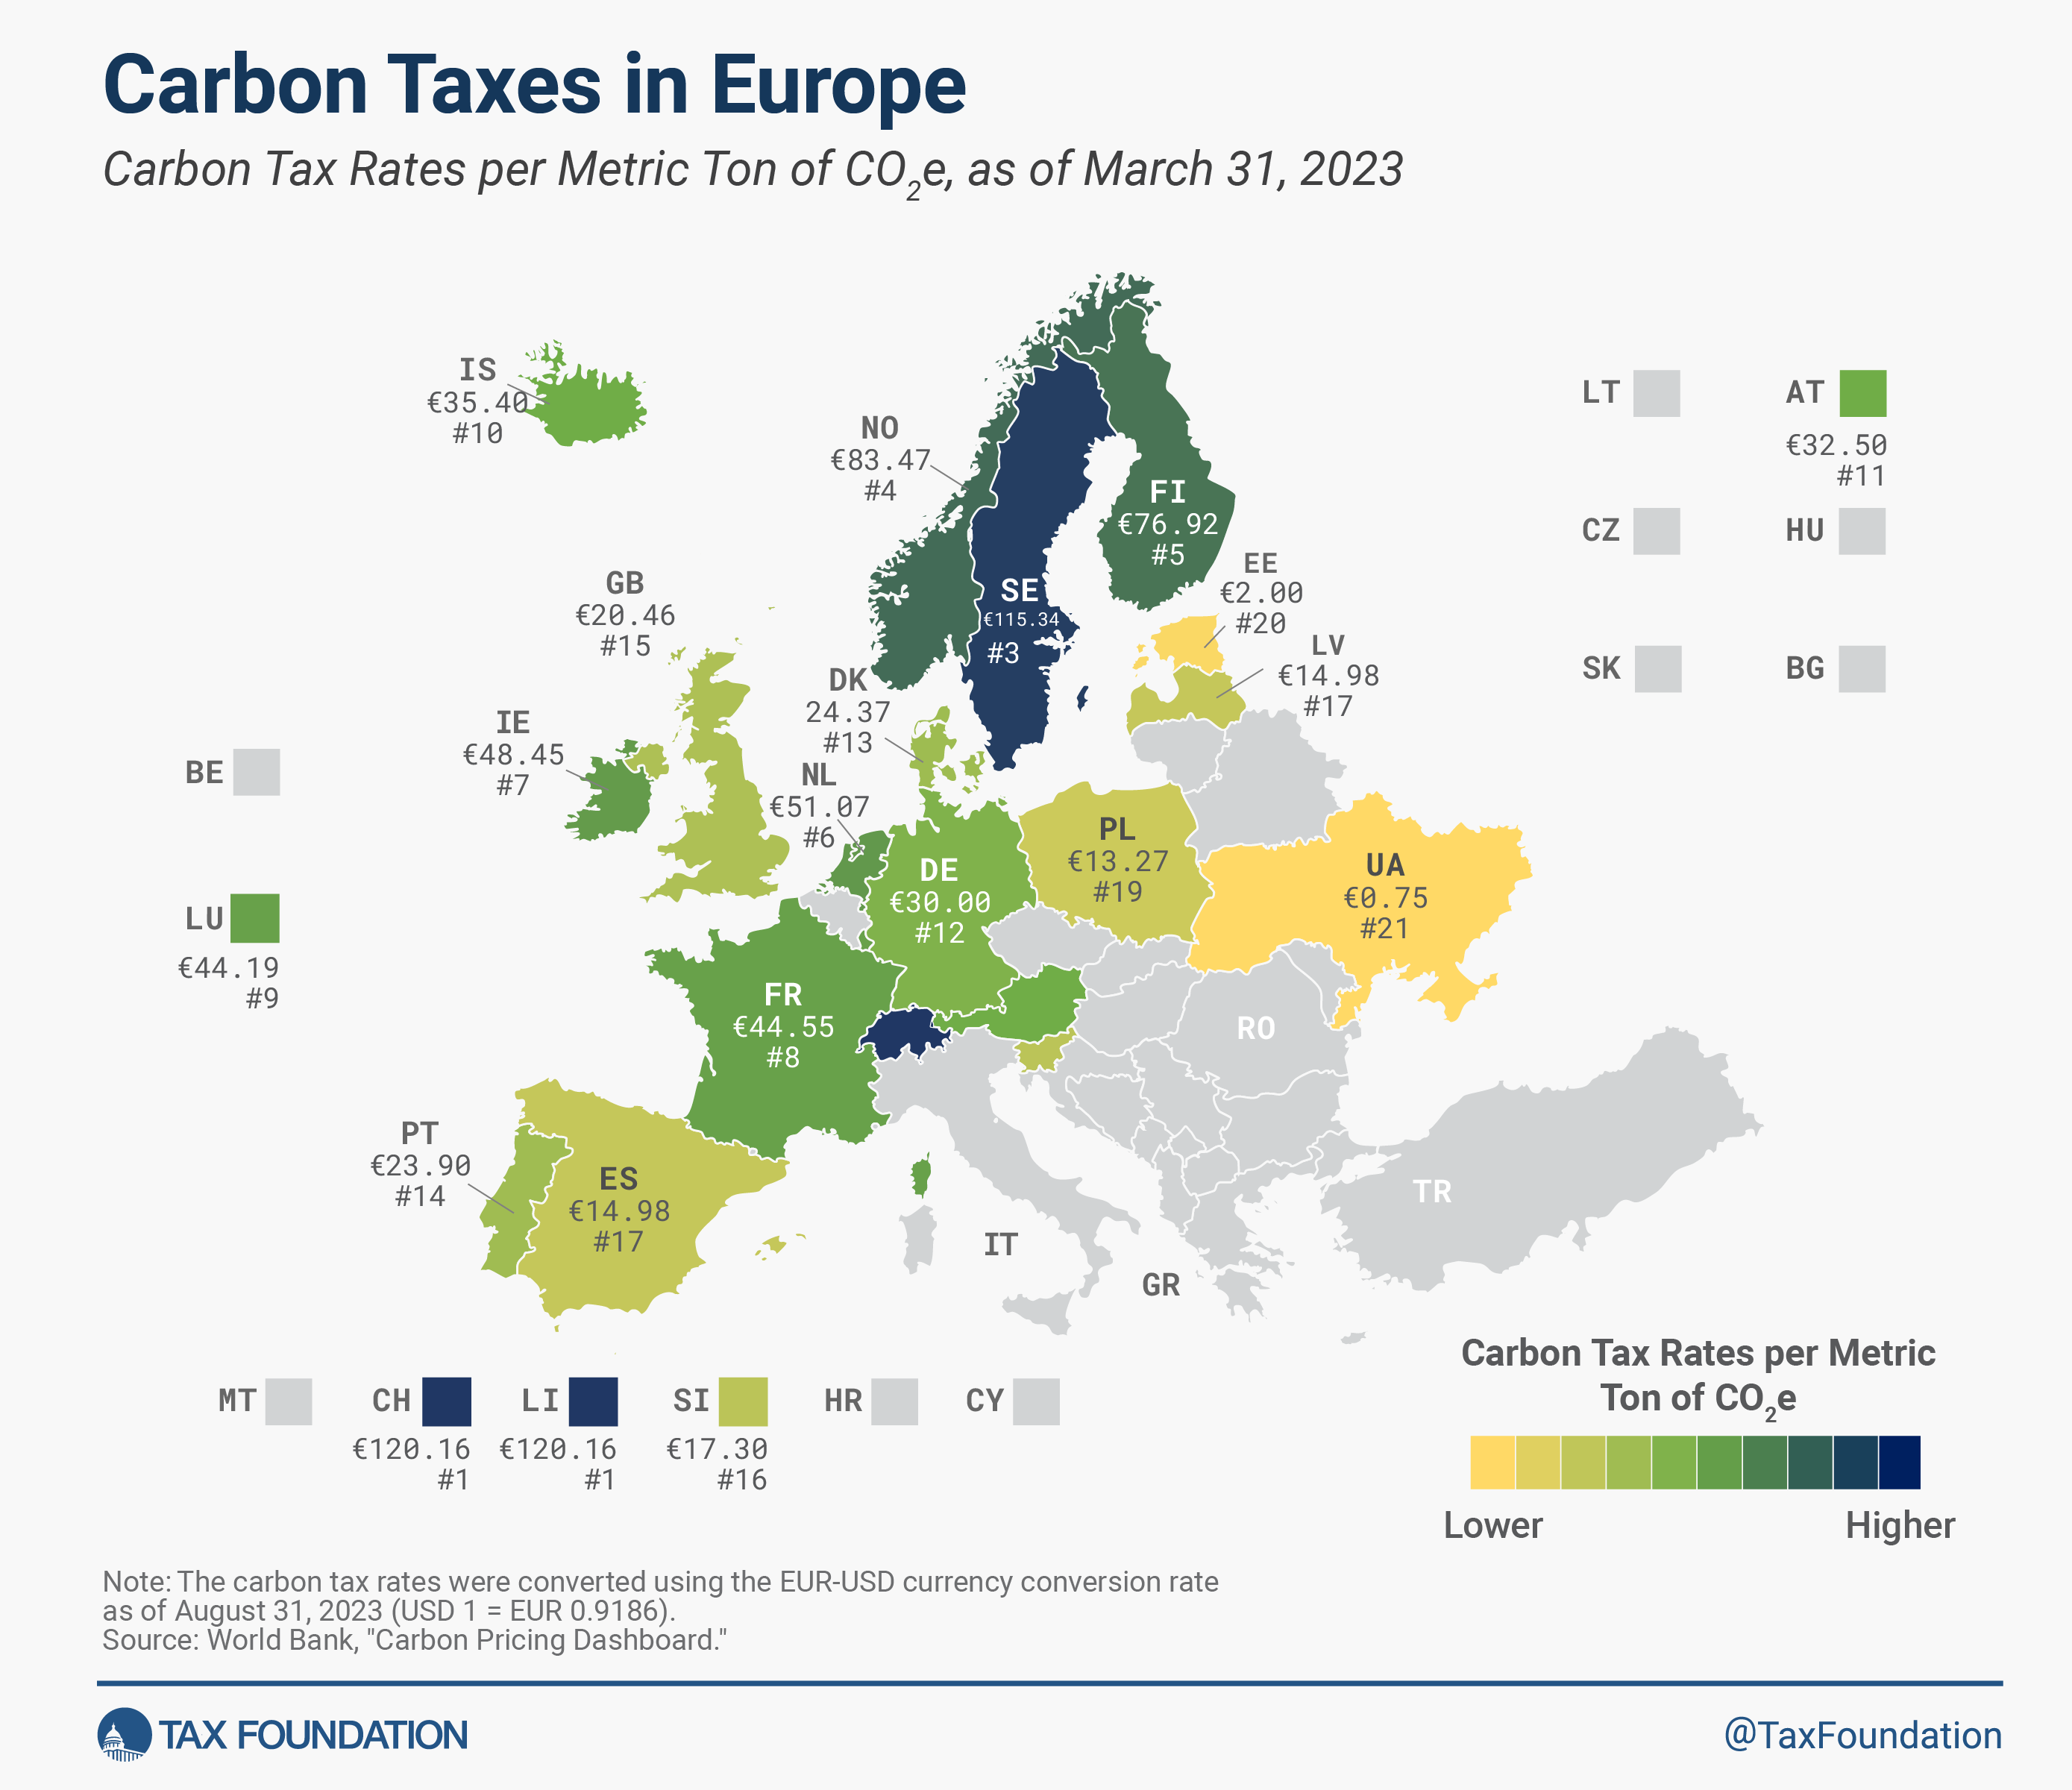 2023 carbon tax rates in Europe and other information related to carbon taxes in Europe